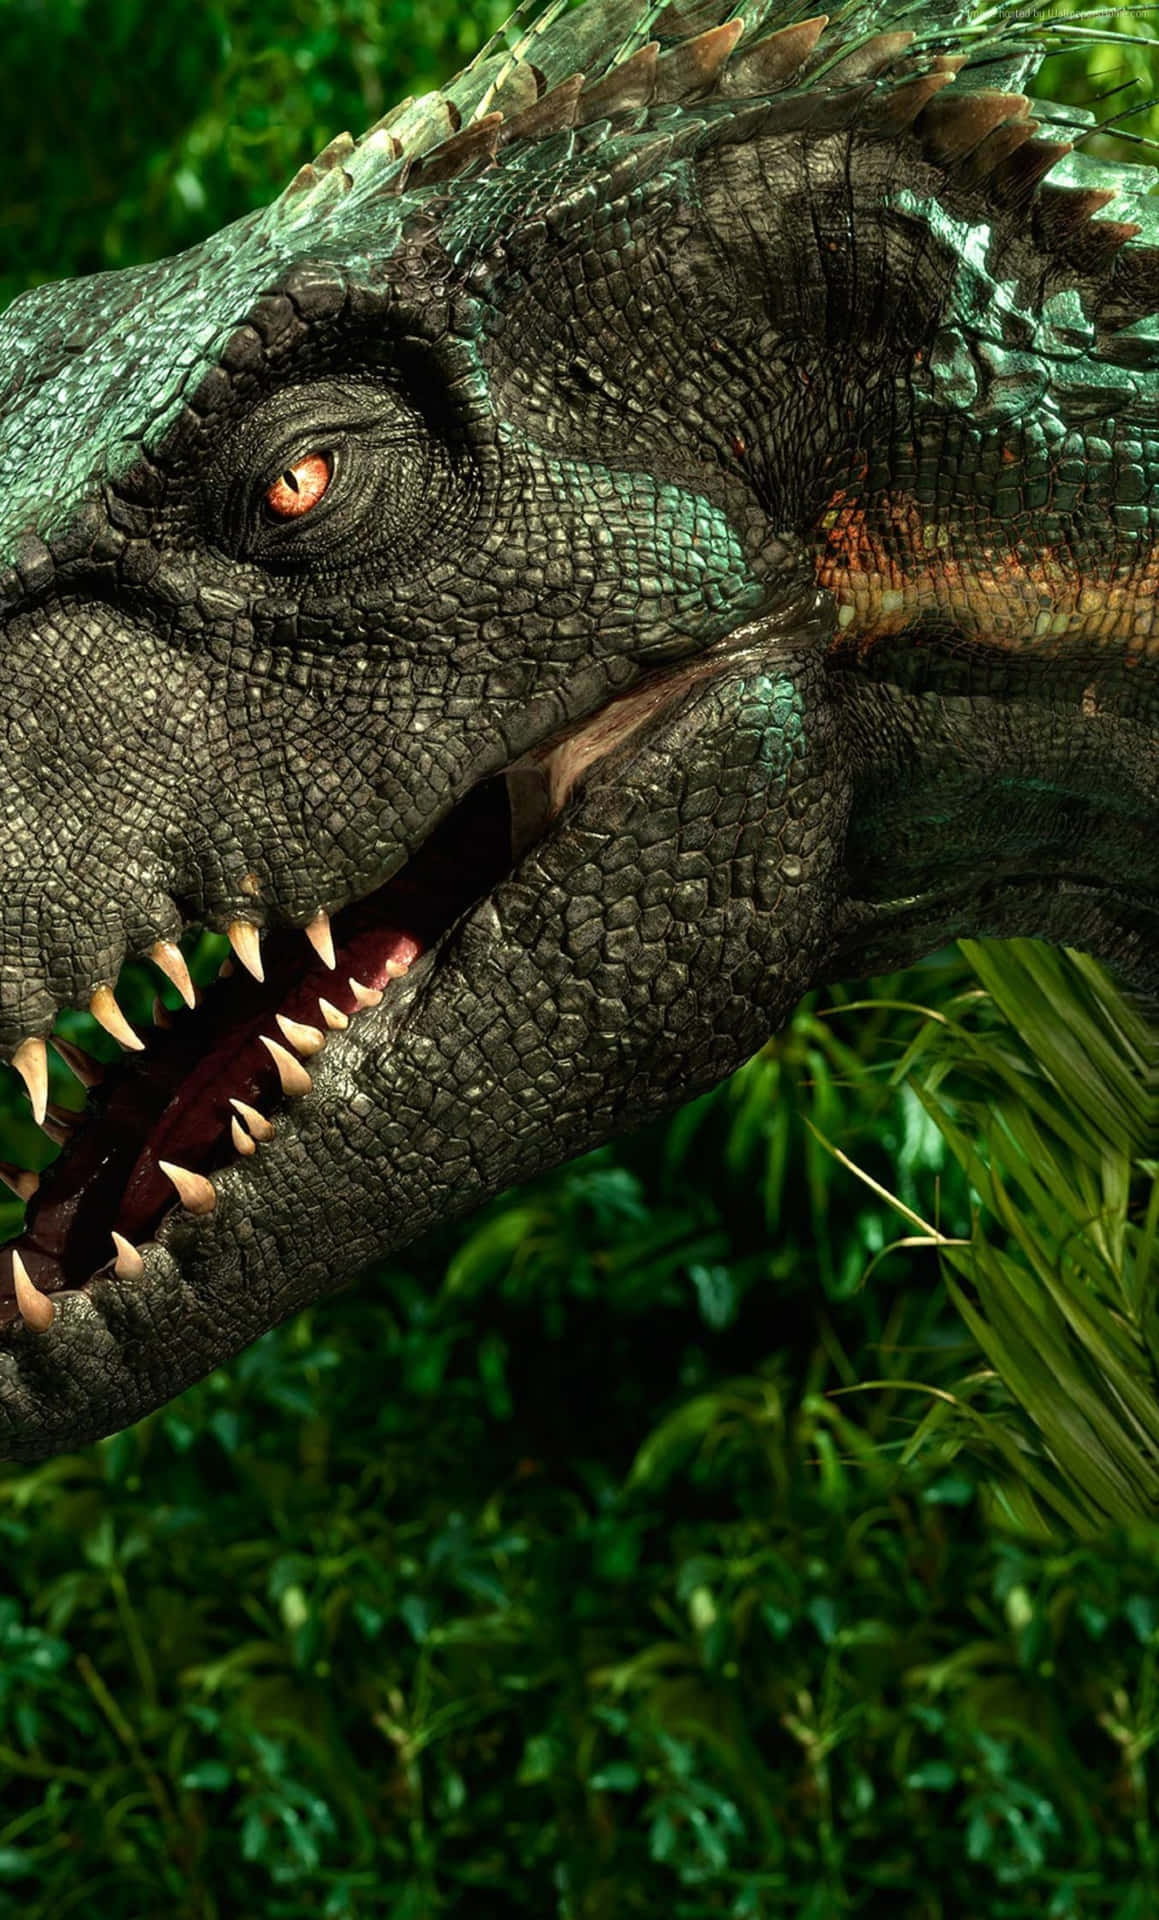 Experience the Unbelievable Reality of this Life-Like Dinosaur Wallpaper